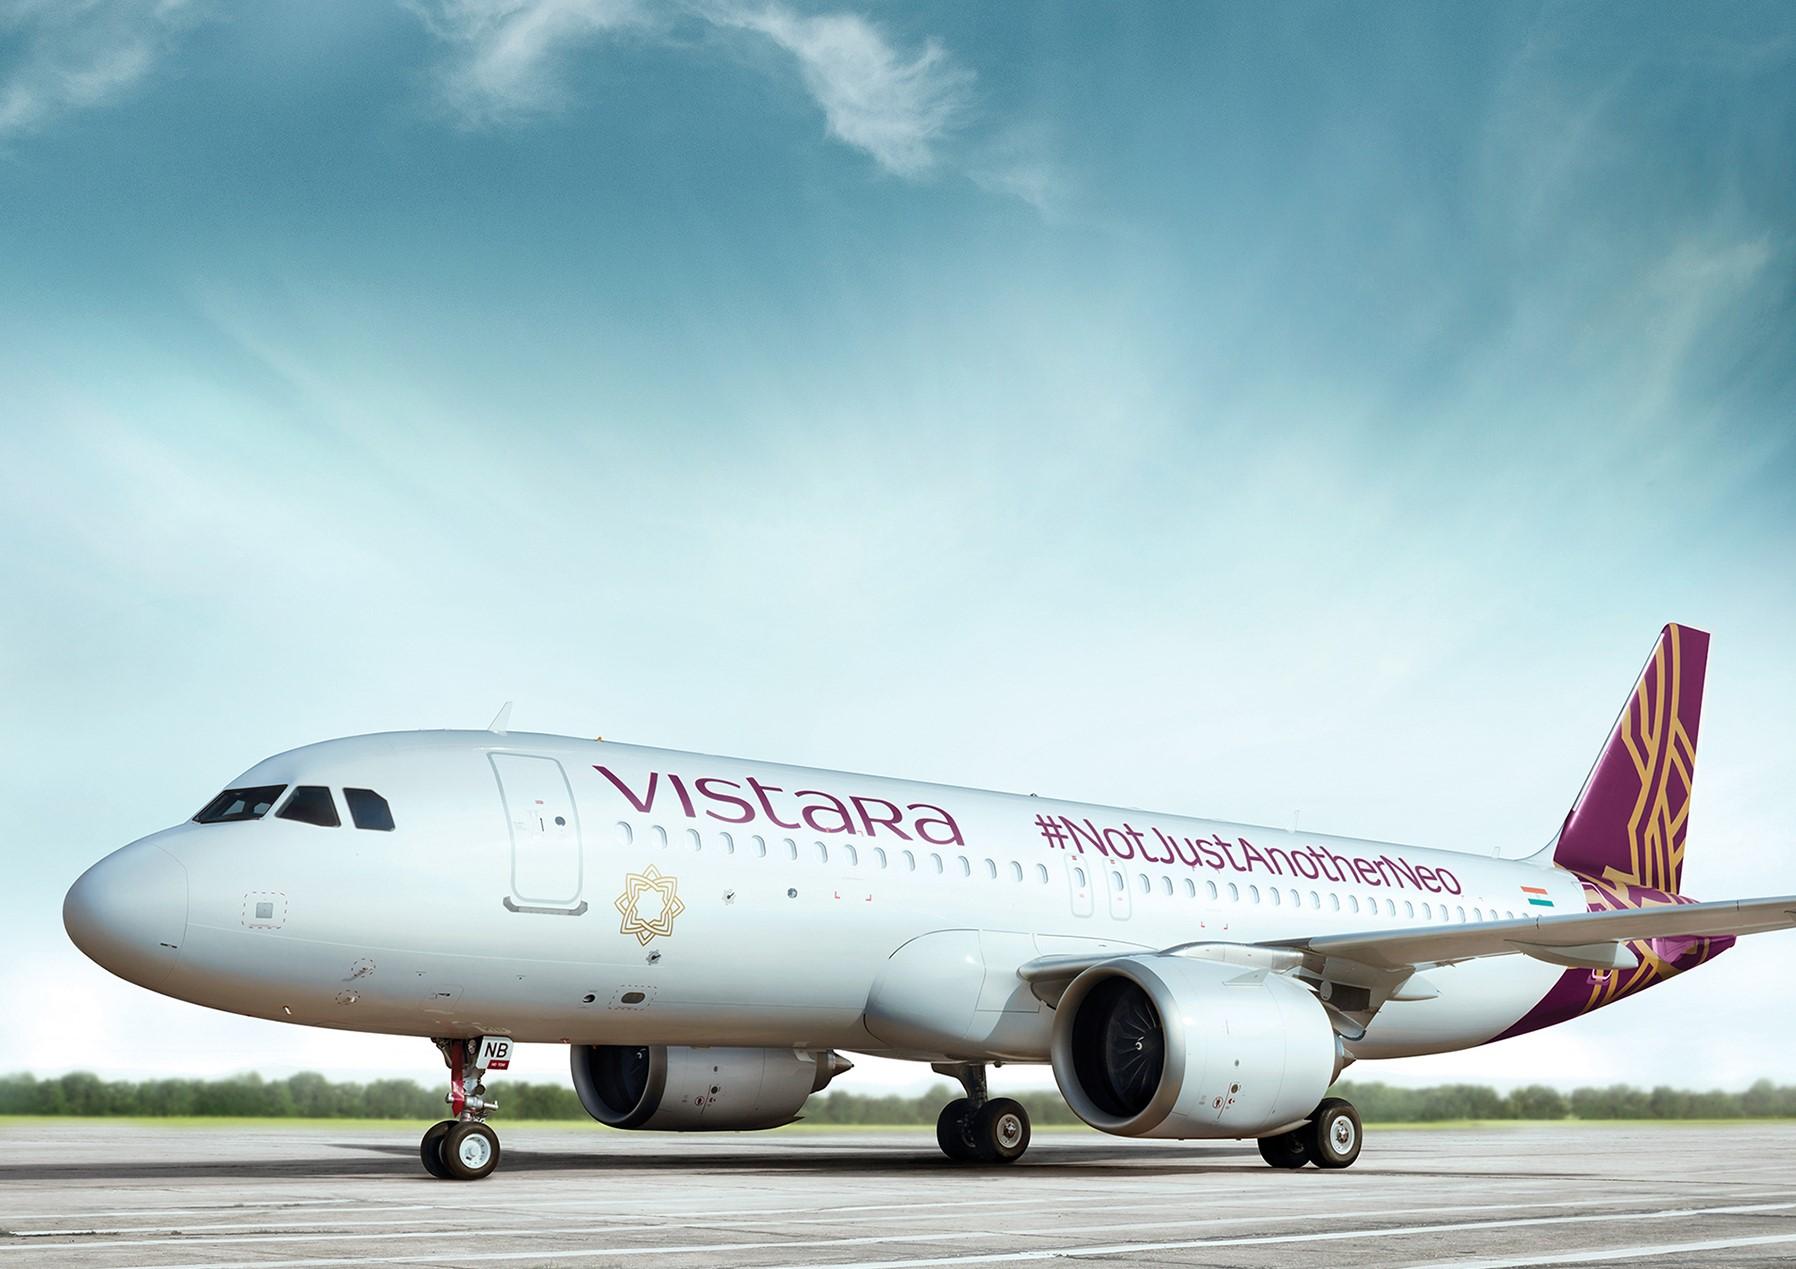 Vistara, Japan Airlines to code-share flights - The Economic Times